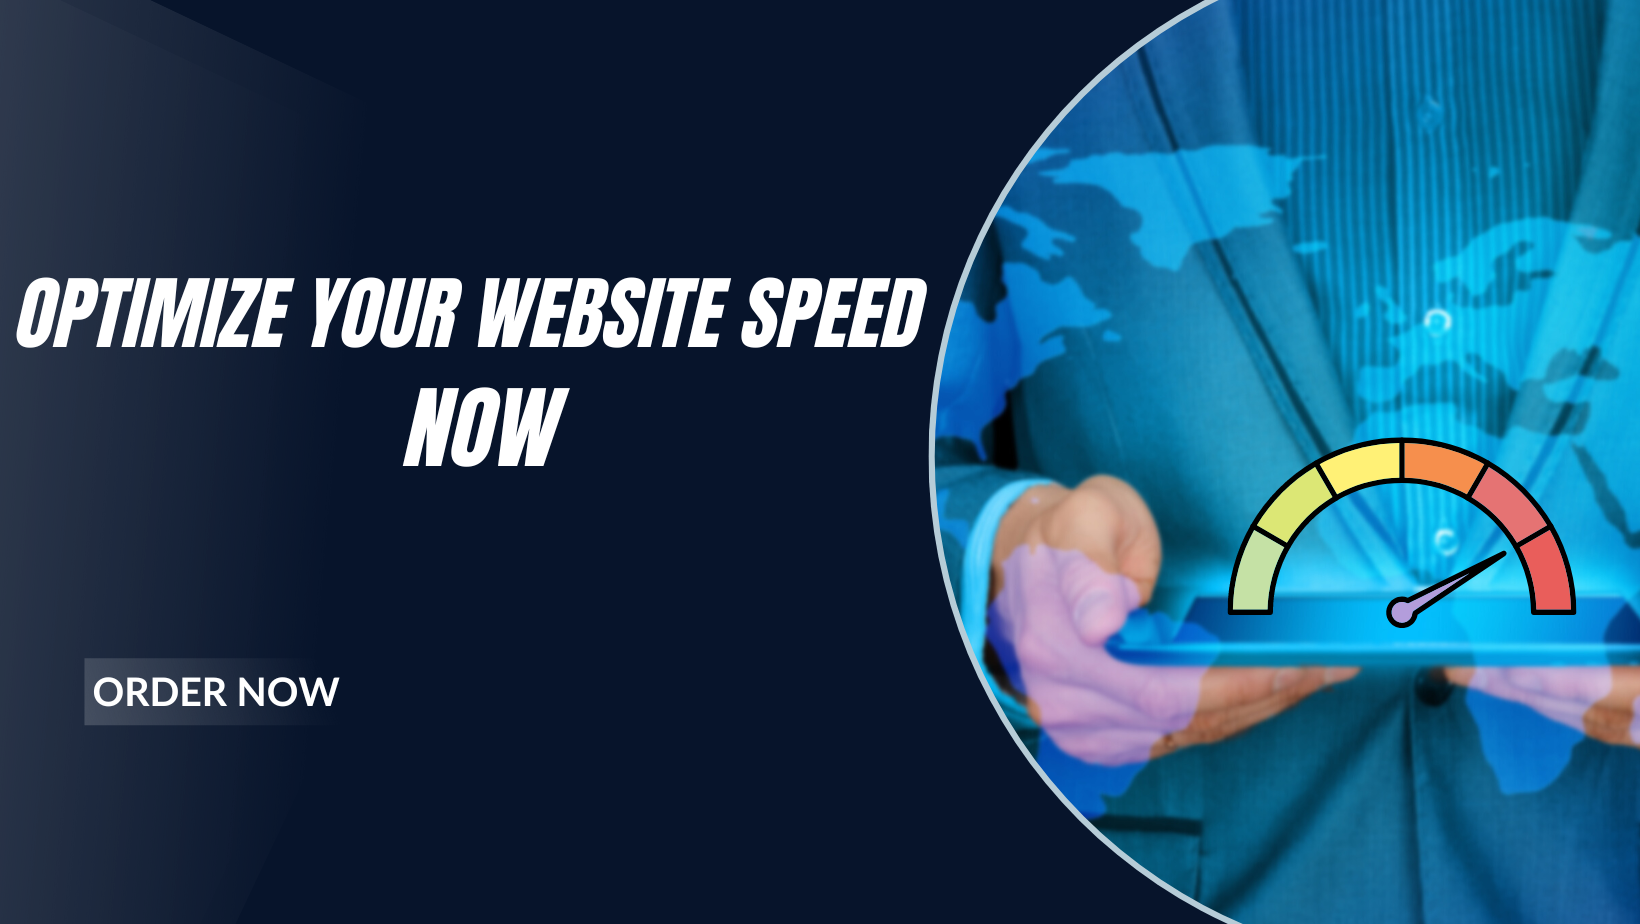 I Will Optimize Your WordPress Website Speed For Fast Loading 